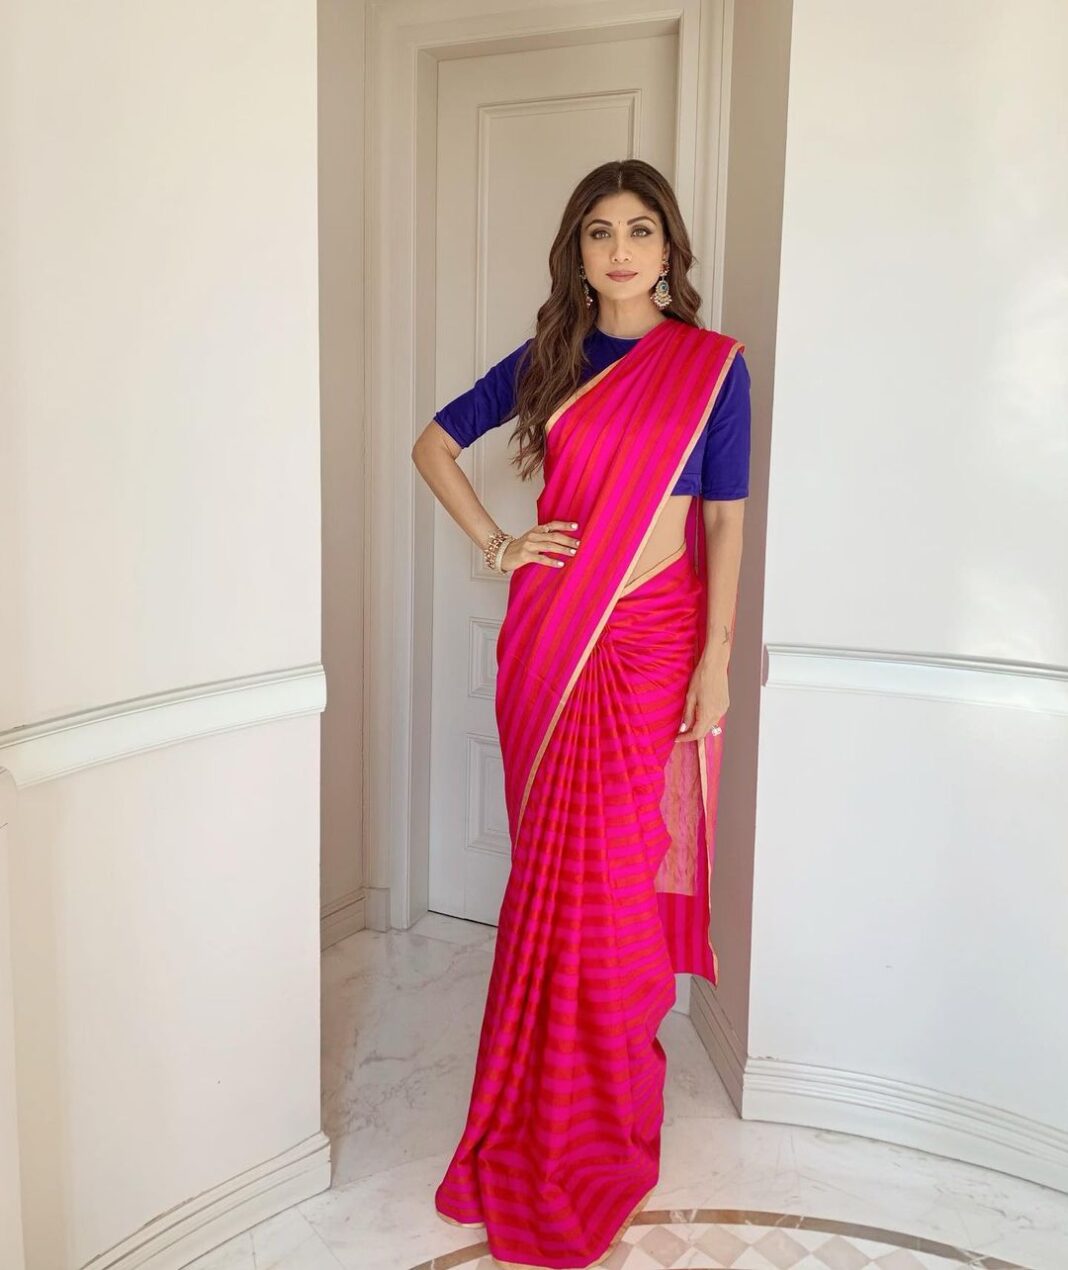 Shilpa Shetty Instagram - All set to attend the launch and 1st committee meeting of the #FitIndiamovement in Delhi. Outfit : @raw_mango Jewellery : @curiocottagejewelry Styled by : @sanjanabatra Assisted by : @rupangisharma @devakshim #fitindia #delhi #swasthrahomastraho #fitnesscomesfirst #motivation